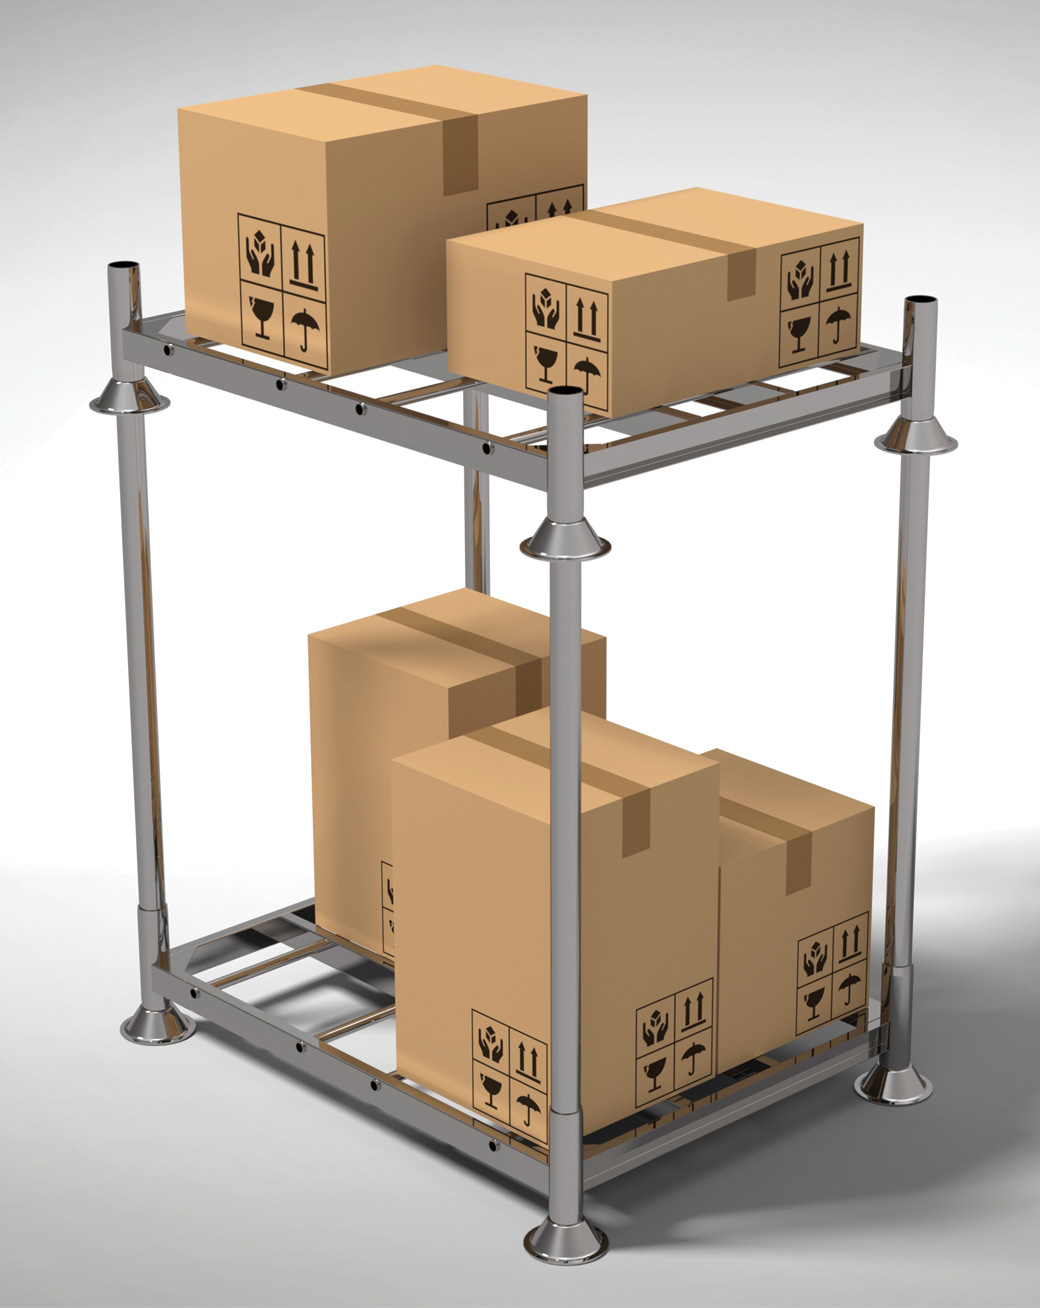 A metal pallet fully loaded with packages on both the upper and lower tiers.